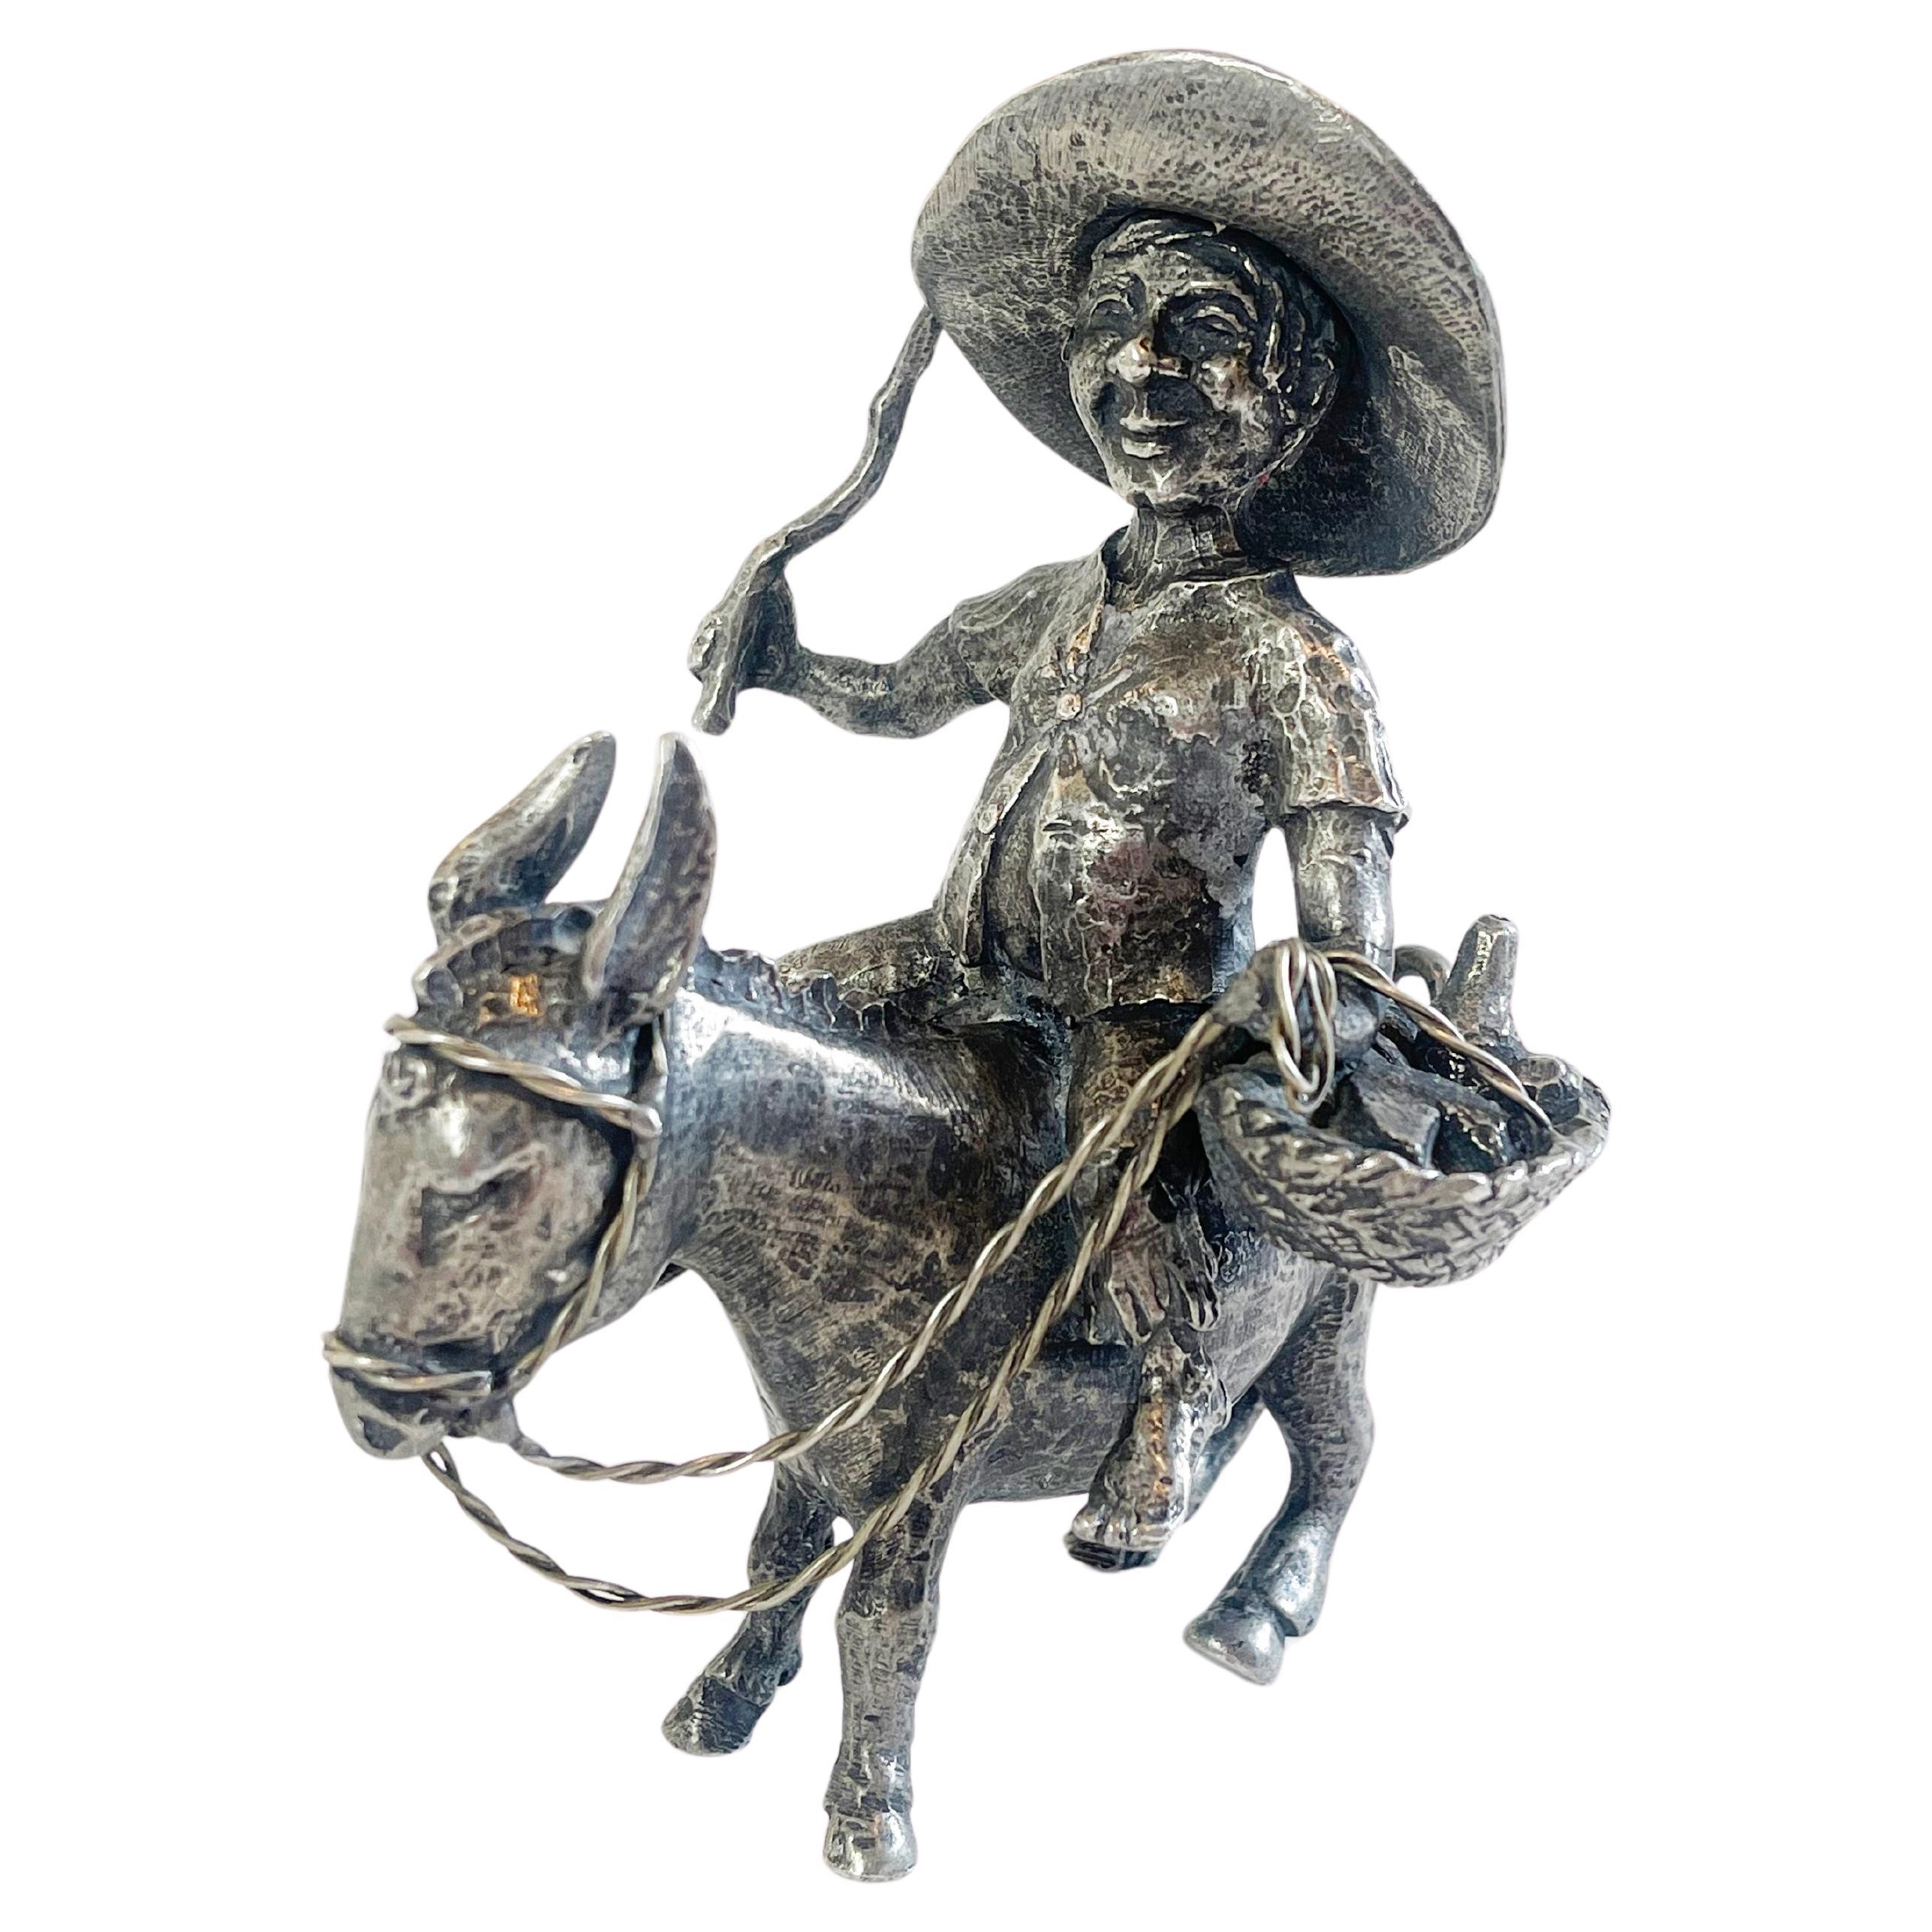 Figurine of the character of Sancho Panza, who was Don Quixotes companion. 
Here he is riding is donkey, carrying a basket with cheese, a bottle of wine and sorts over his left arm, a stick in his
left hand. His oversized Mexican style hat provides